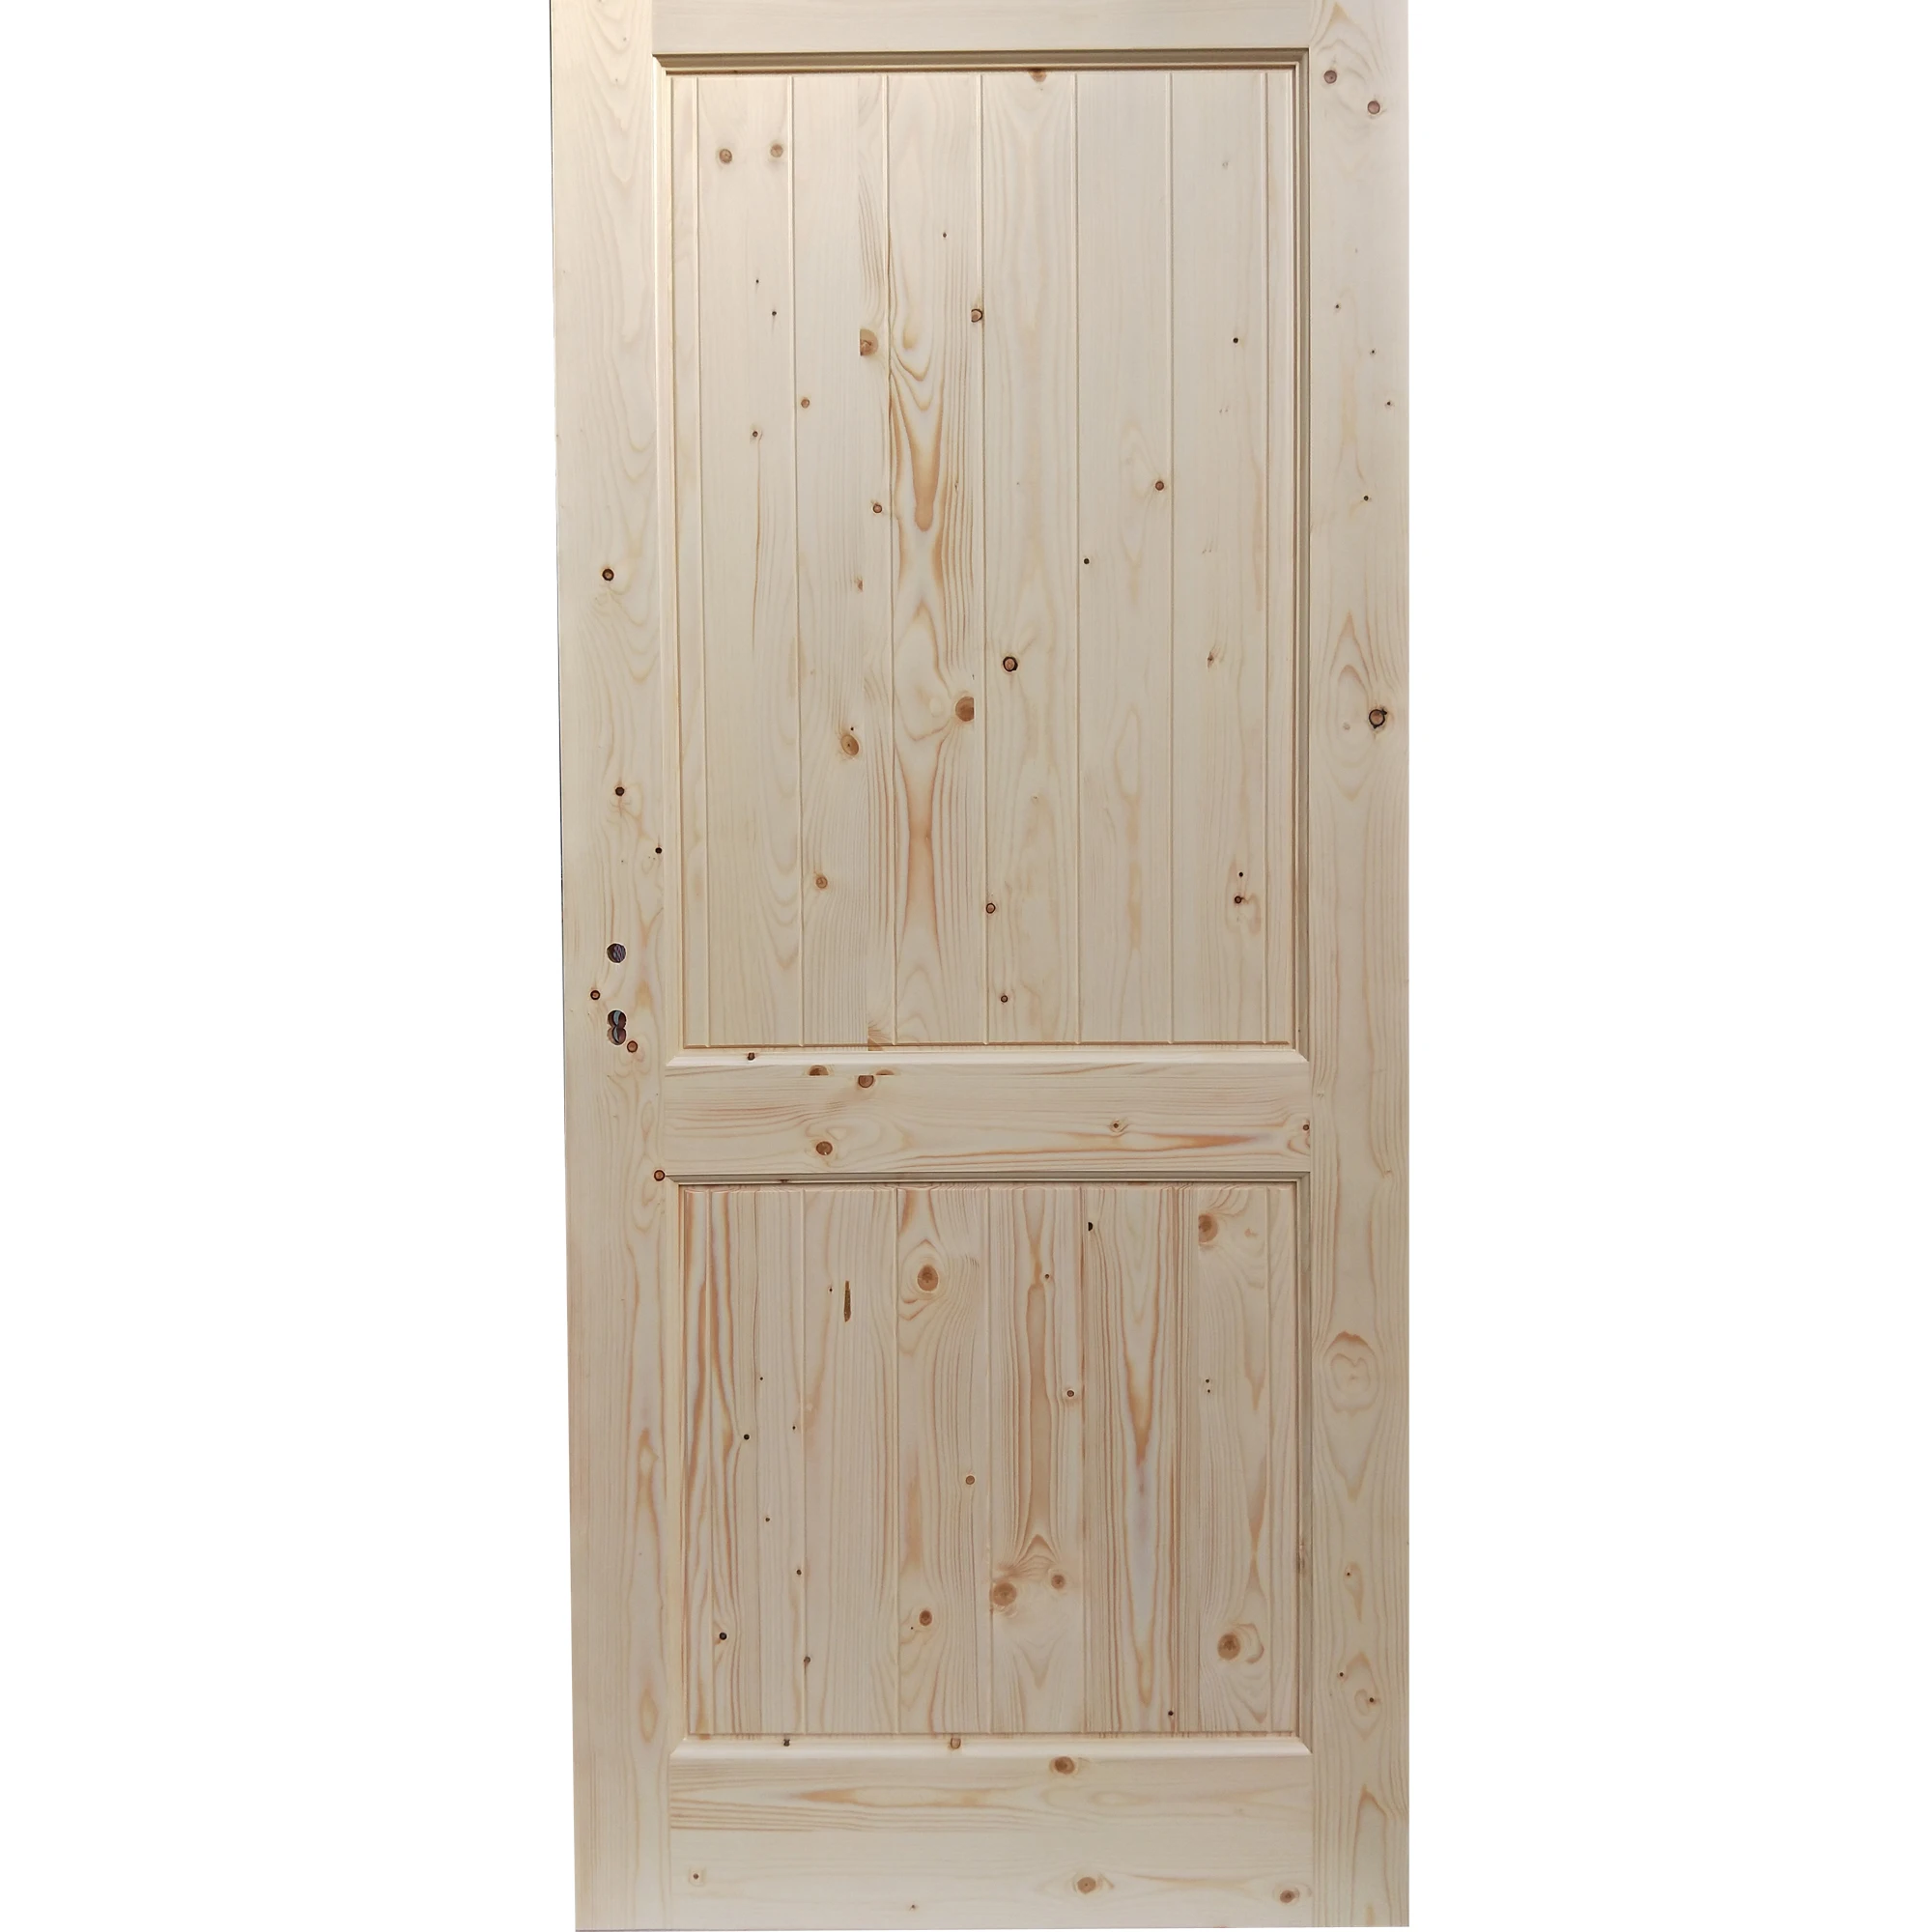 2018 Kangton Top Quality Two Panel Solid Pine Interior Wood Door With Clear Lacquer Finish Buy Interior Door Two Panel Solid Pine Interior Wood